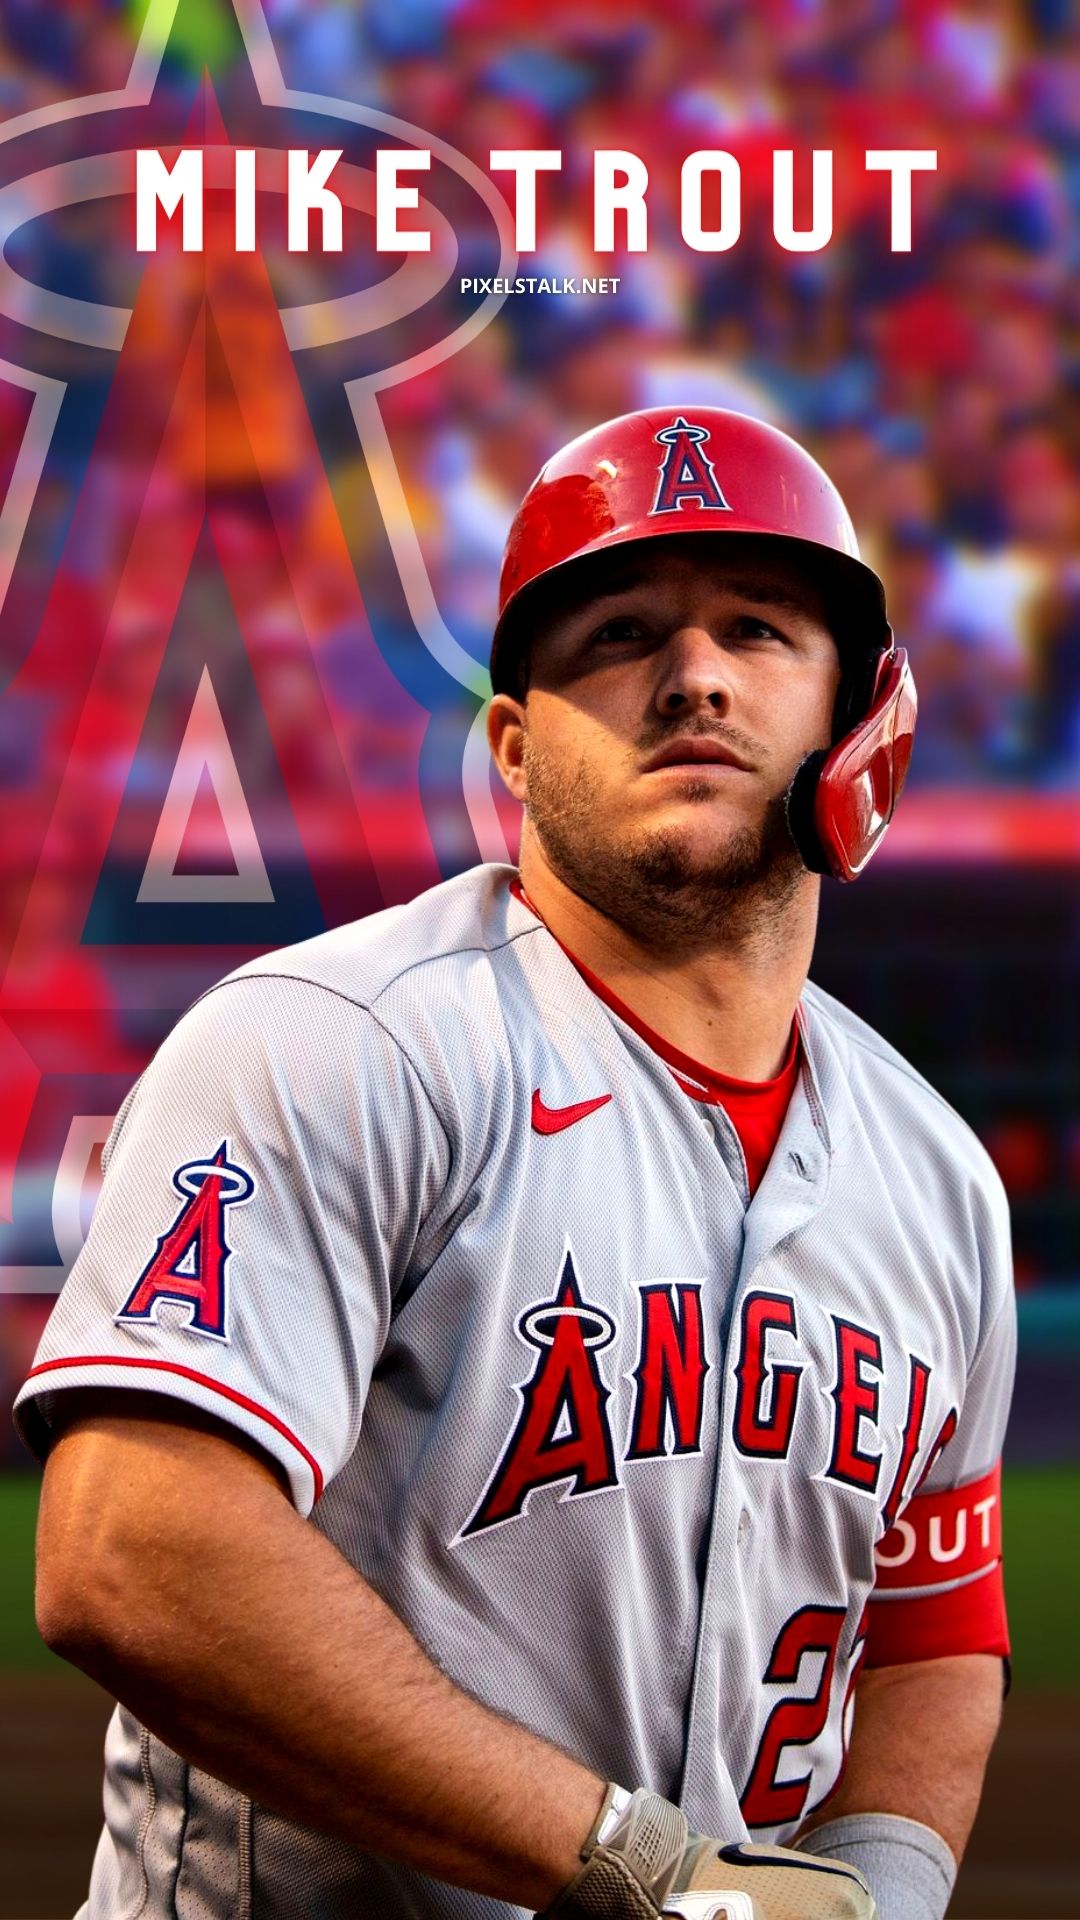 Mike Trout Famous American Baseball Player Wallpaper  HD Wallpapers